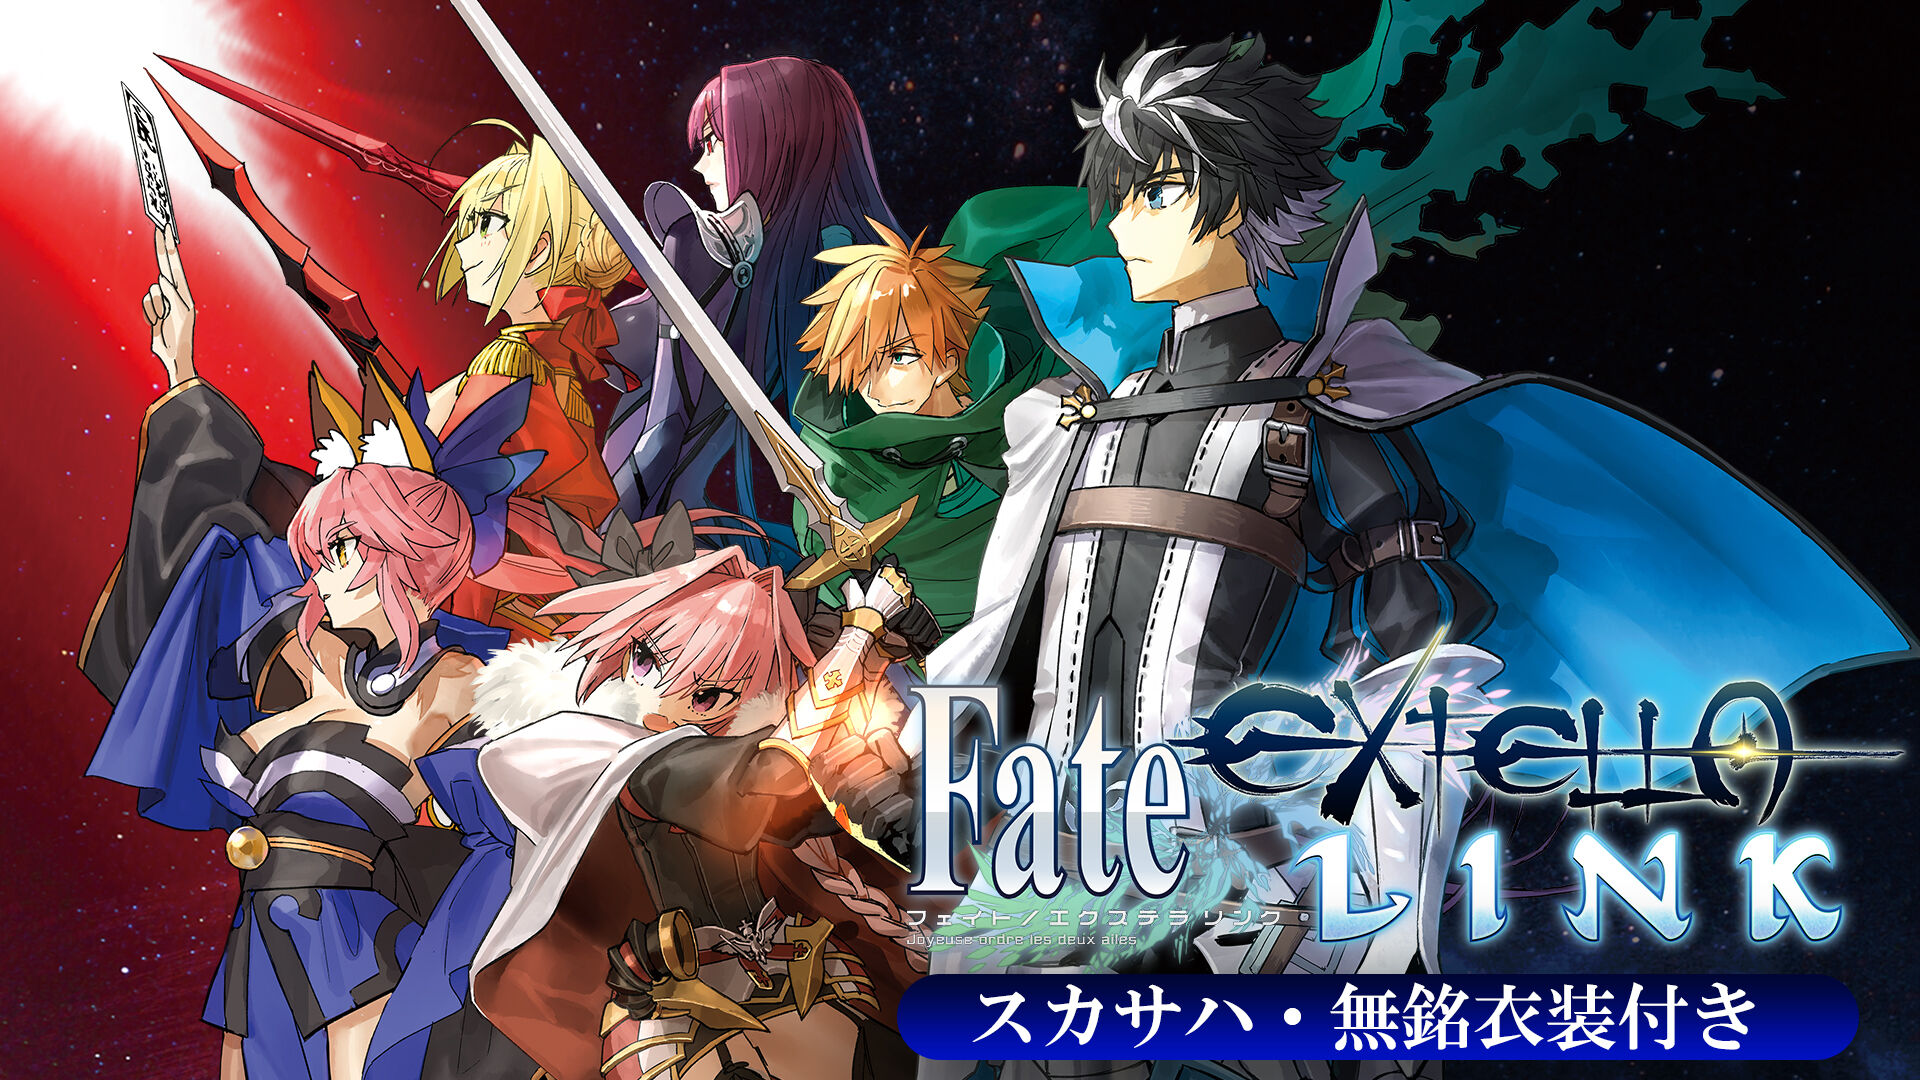 Fate/EXTELLA LINK switch 2セット